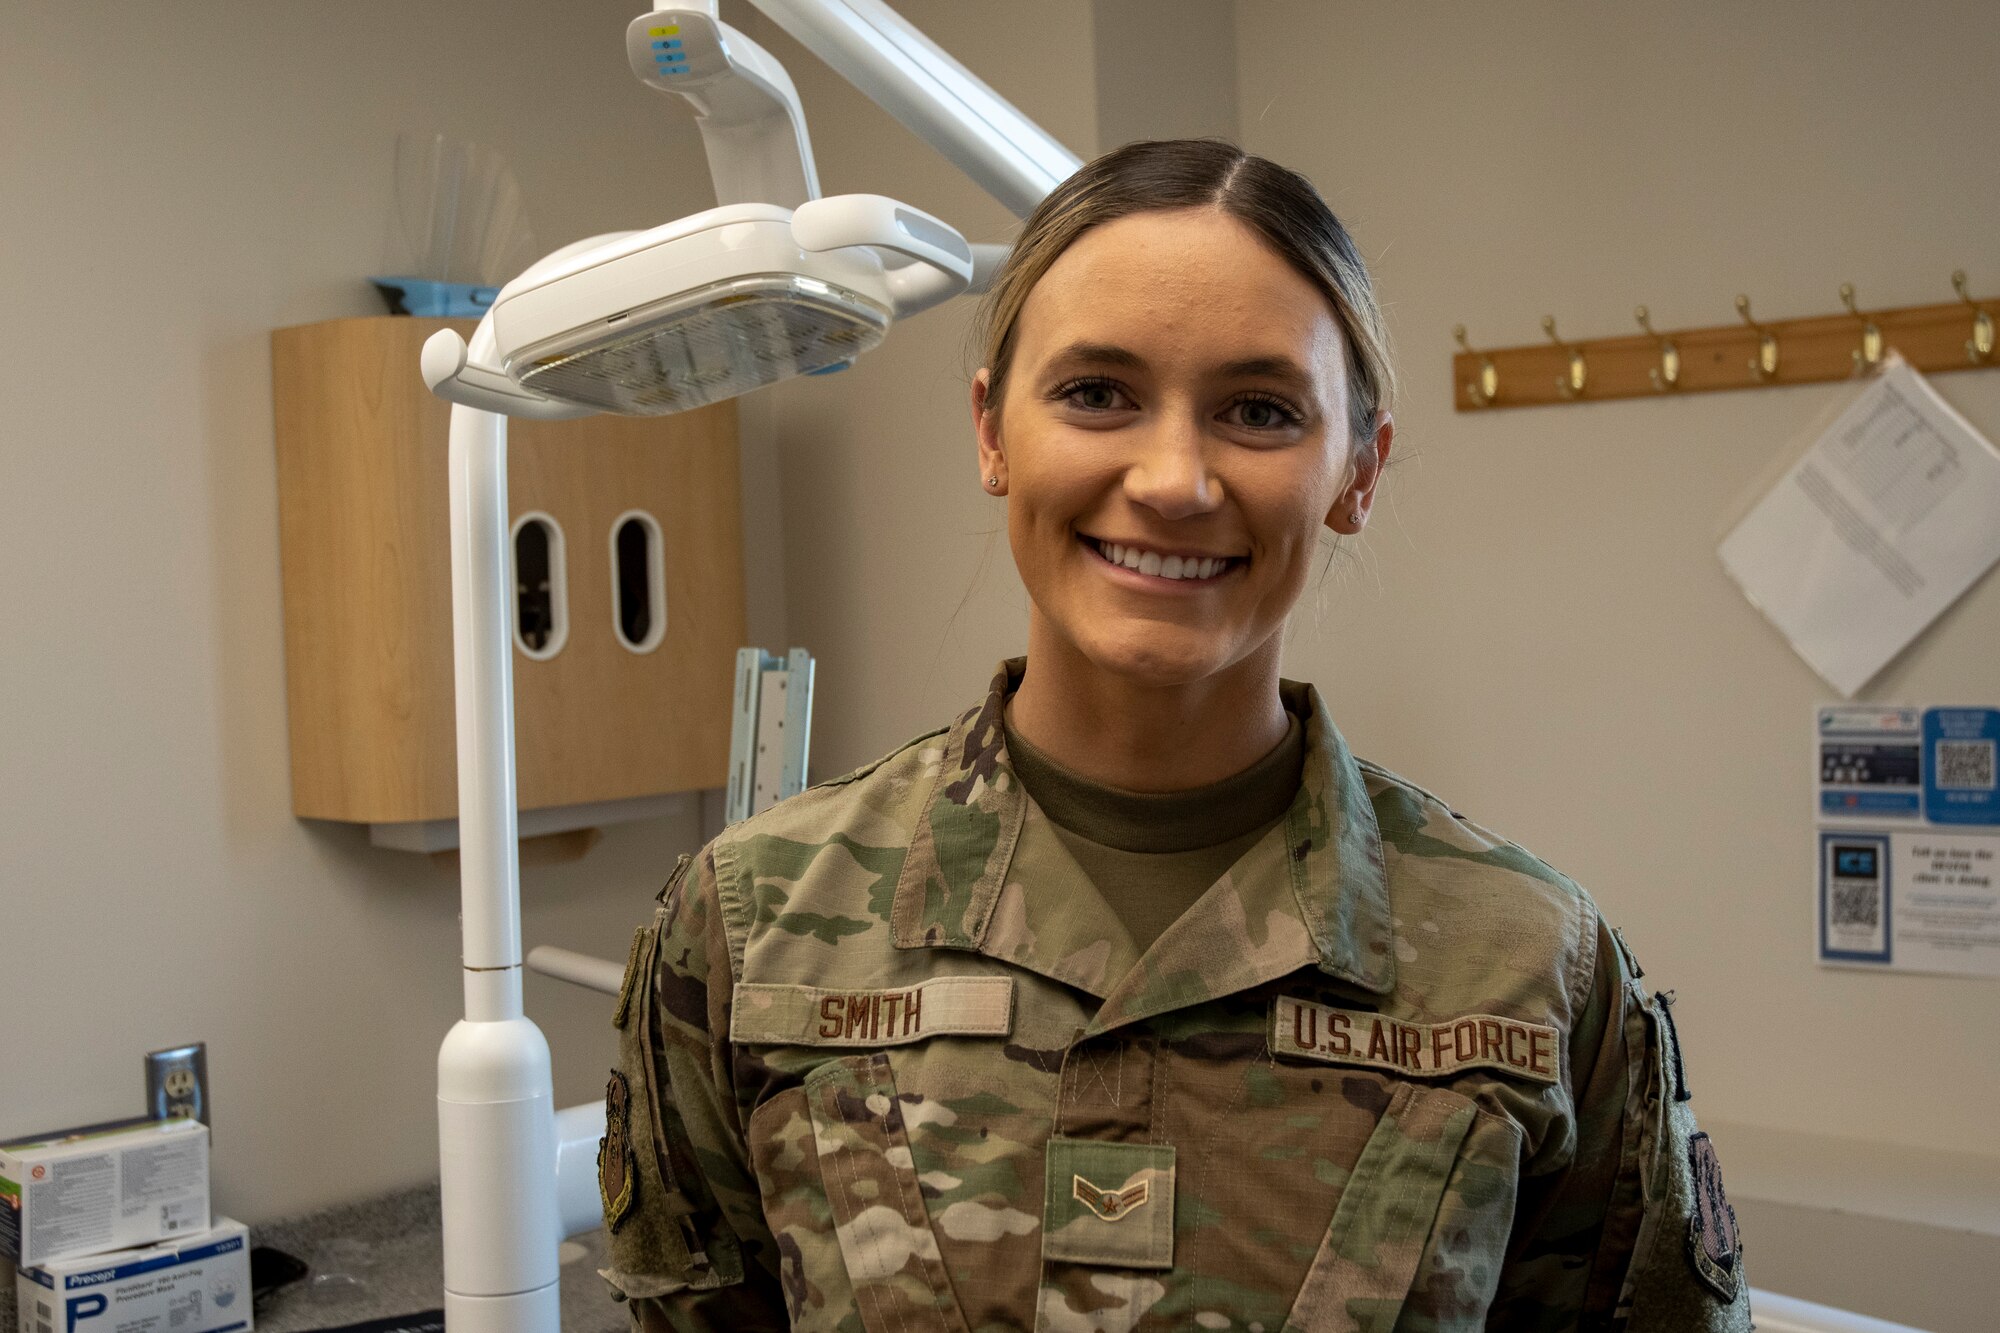 Portrait of a U.S. Air Force Airman poses for a photo of a Portrait in OCP patterned uniform in a dental office